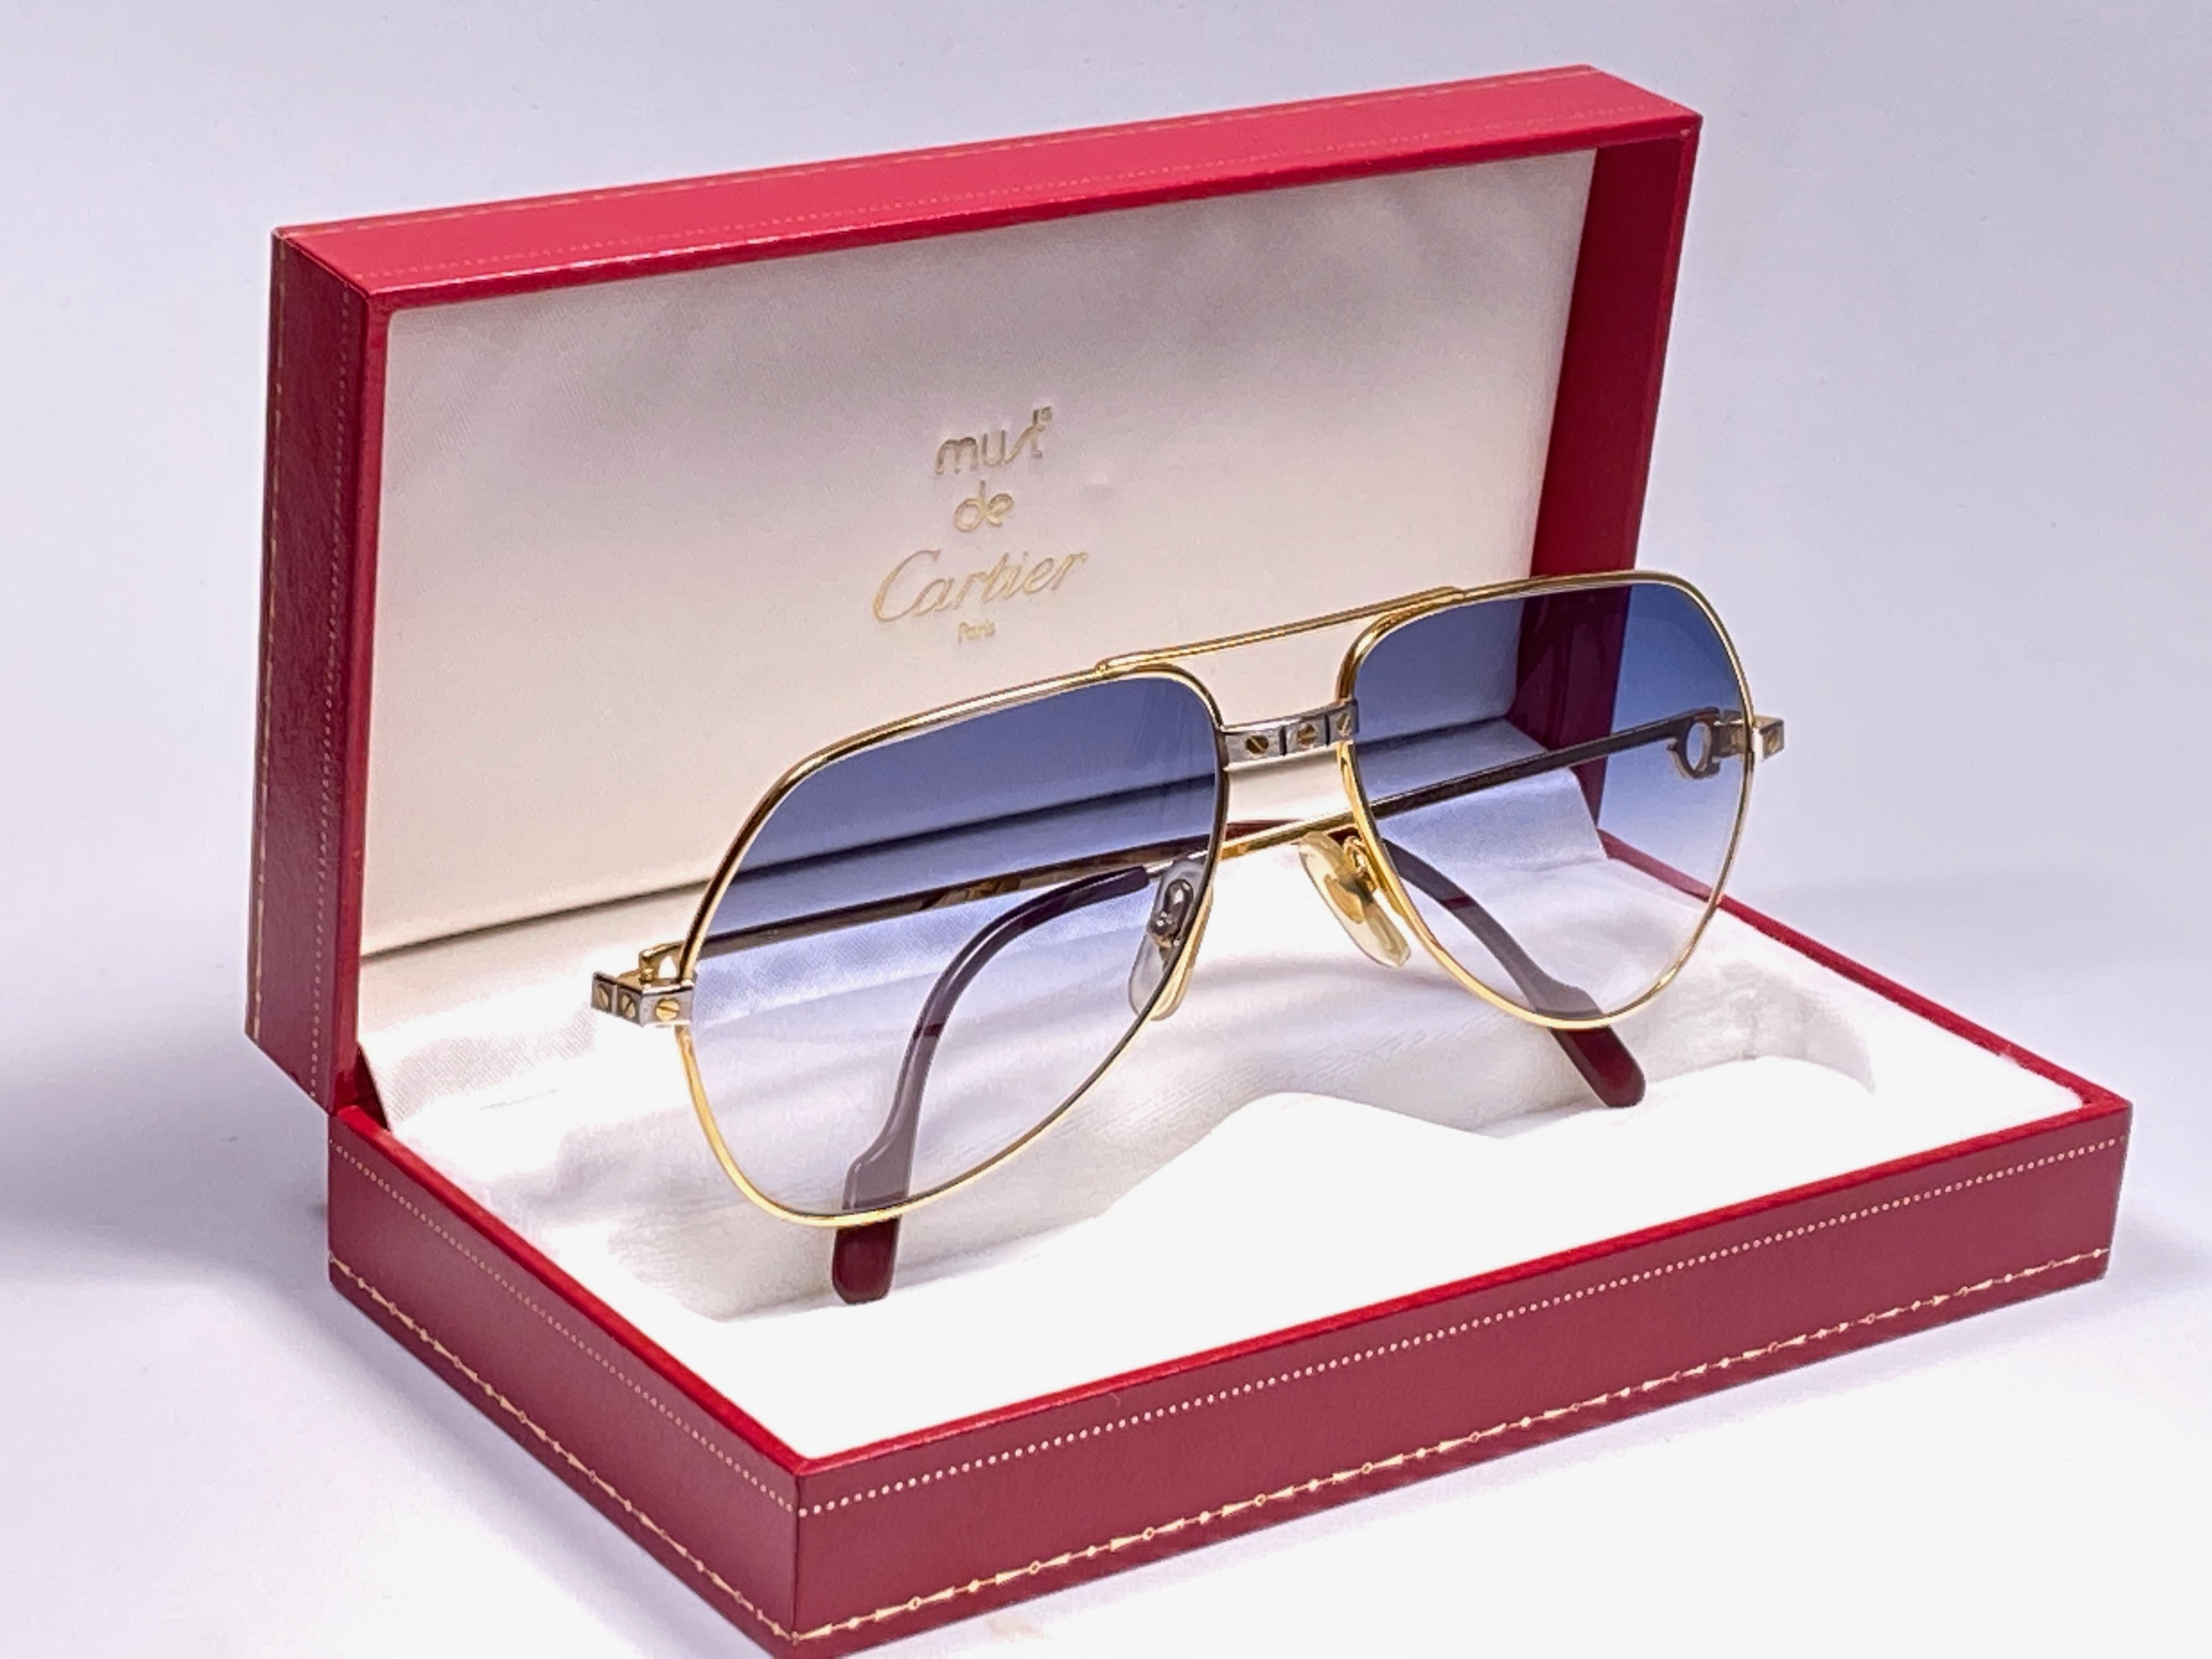 New from 1983!!! Cartier Aviator Santos Sunglasses with customized blue gradient (uv protection) Lenses. 
Frame is with the famous screws on the front and sides in yellow and white gold. All hallmarks. Red enamel with Cartier gold signs on the ear